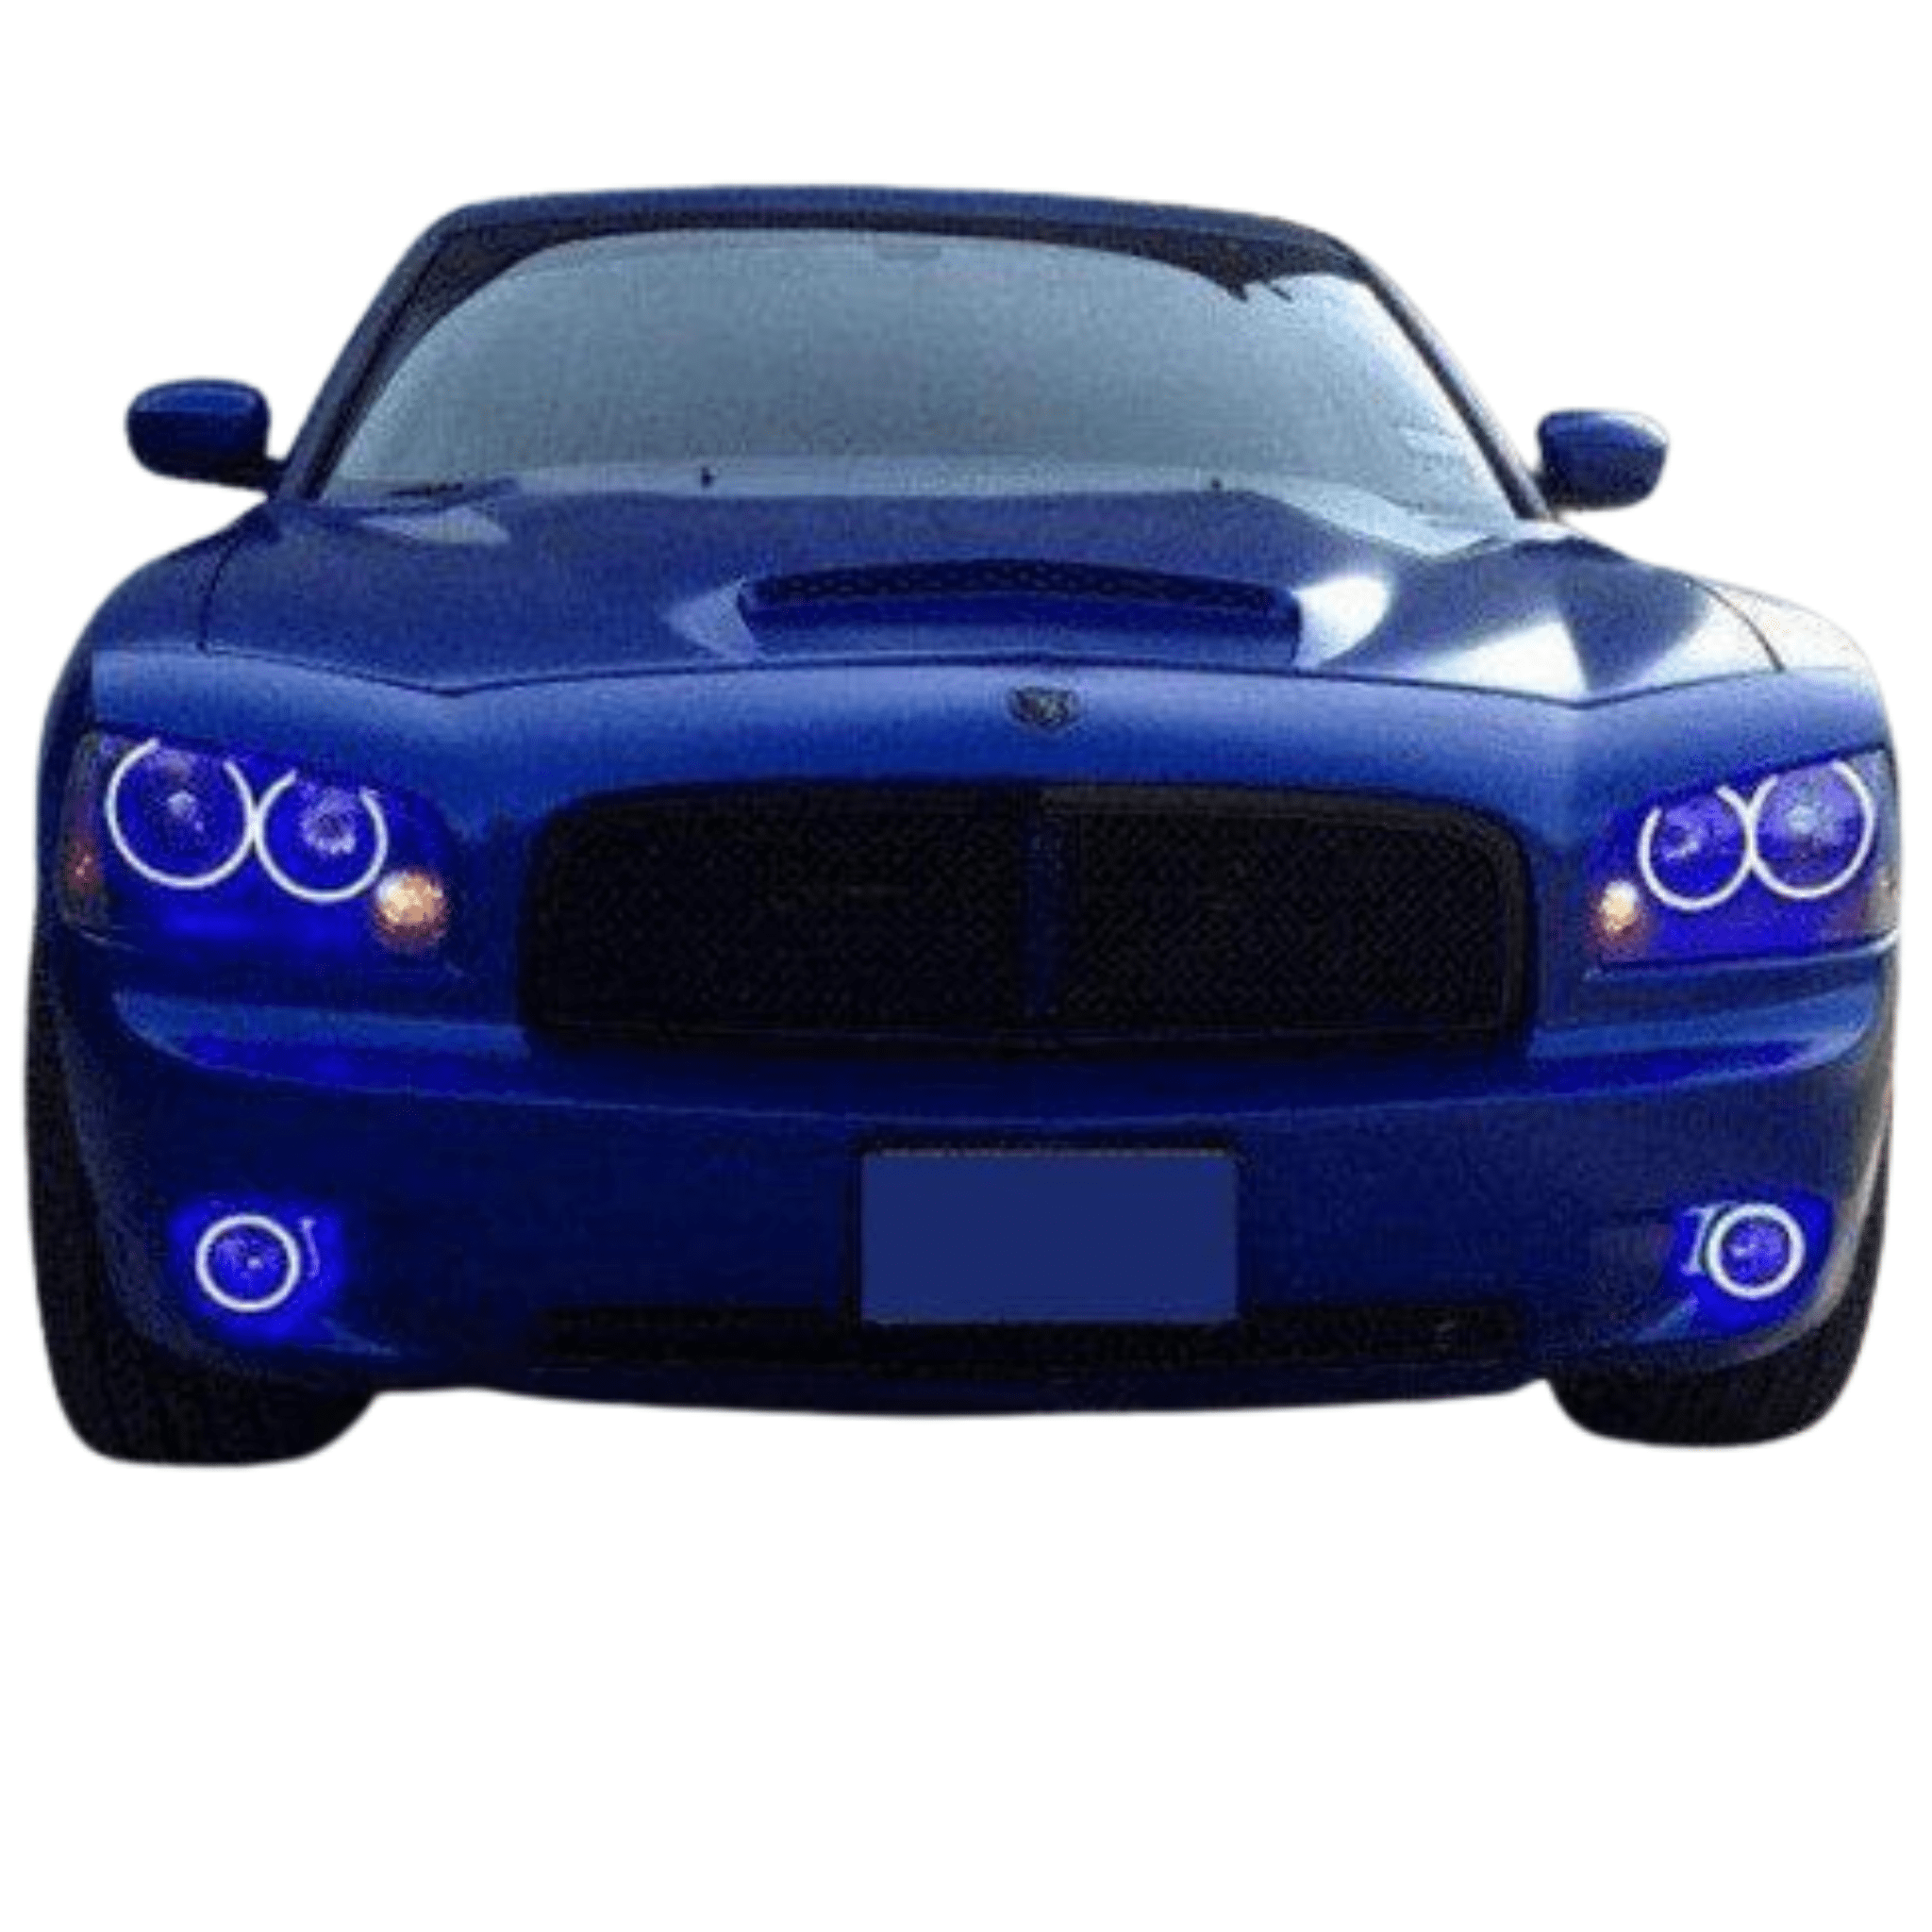 2006-2010 Dodge Charger Multicolor Halo Kit - RGB Halo Kits Multicolor Flow Series Color Chasing RGBWA LED headlight kit Colorshift Oracle Lighting Trendz OneUpLighting Morimoto theretrofitsource AutoLEDTech Diode Dynamics